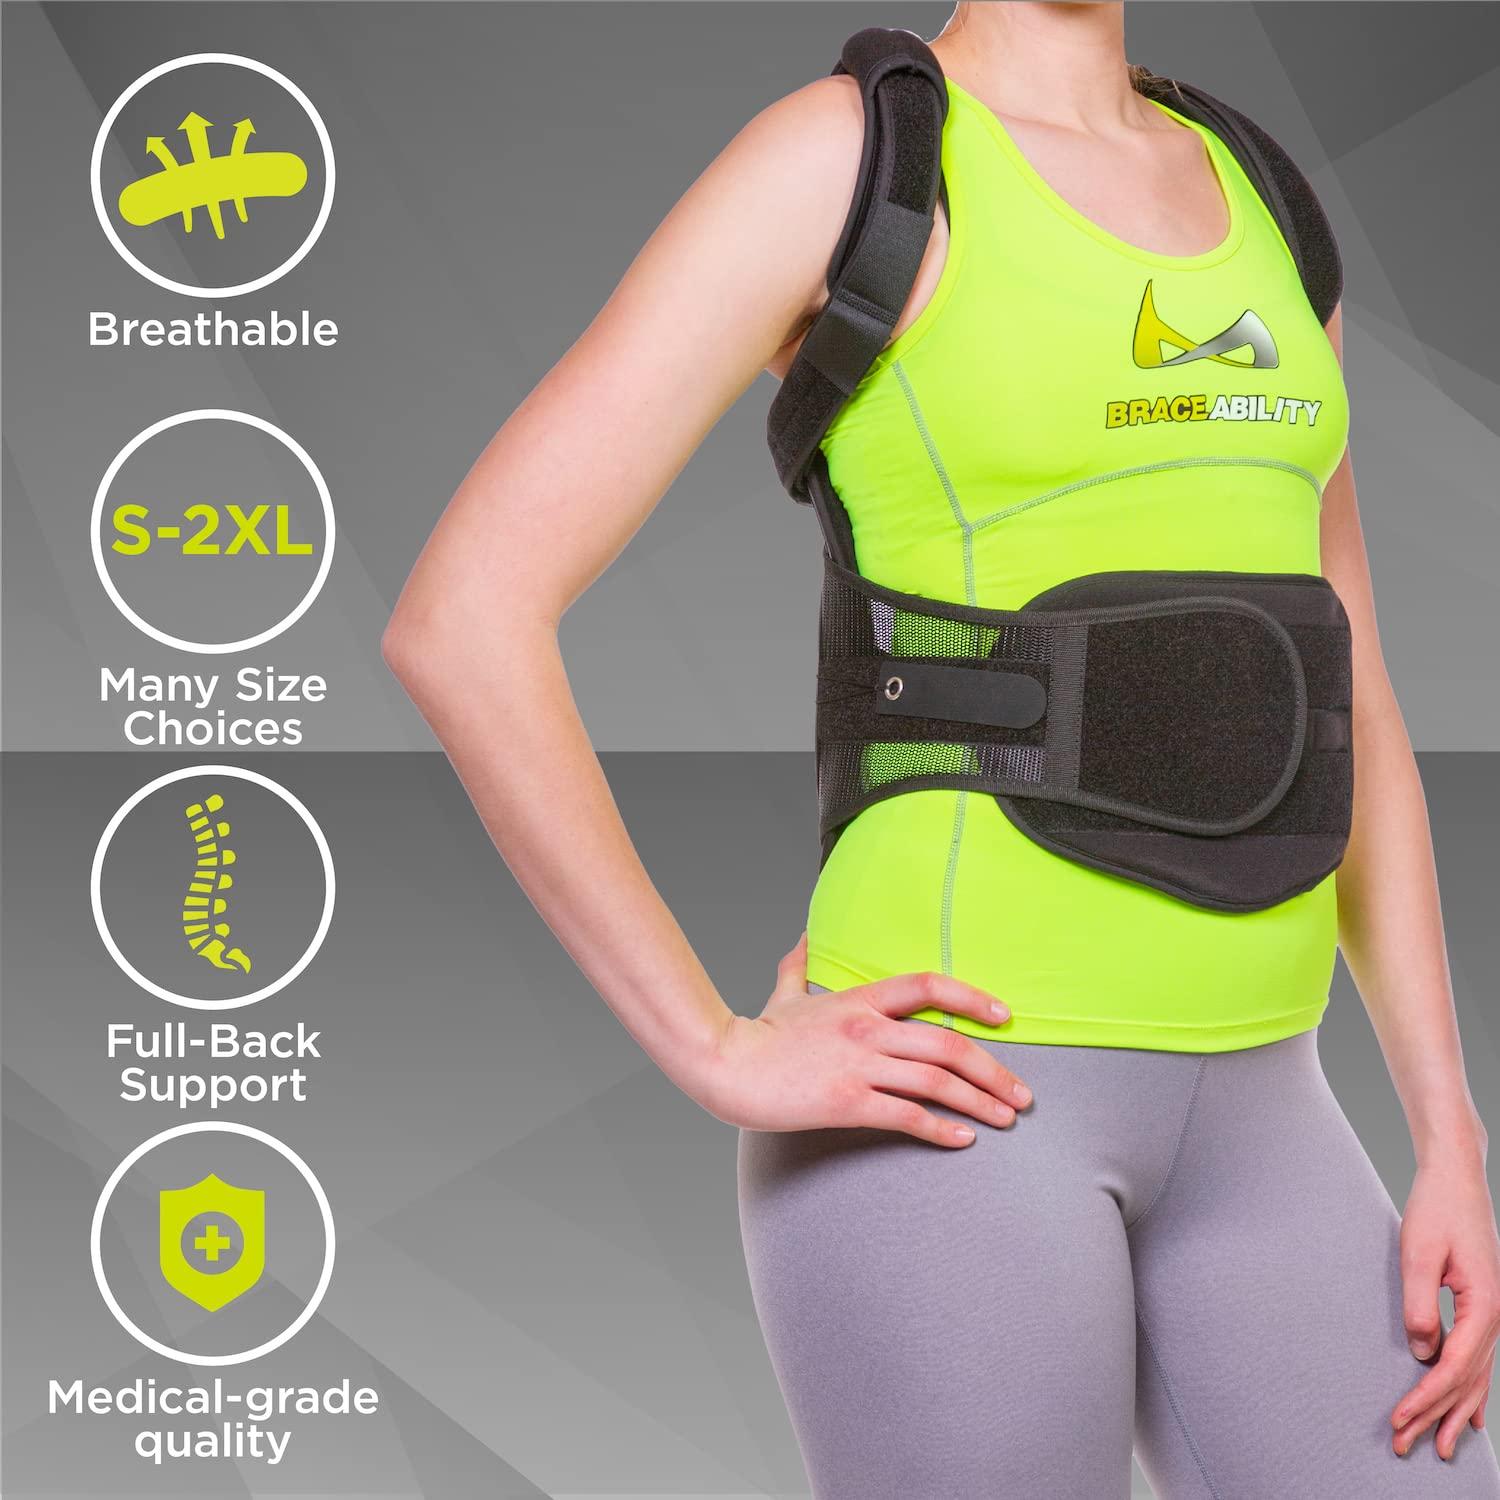 BraceAbility TLSO Full-Body Back Brace Support - Hard Clamshell Jacket for  Thoracic Kyphosis Parkinson's Disease Fractured Spine Scoliosis Postural  Correction Post-Surgery Recovery (Medium)